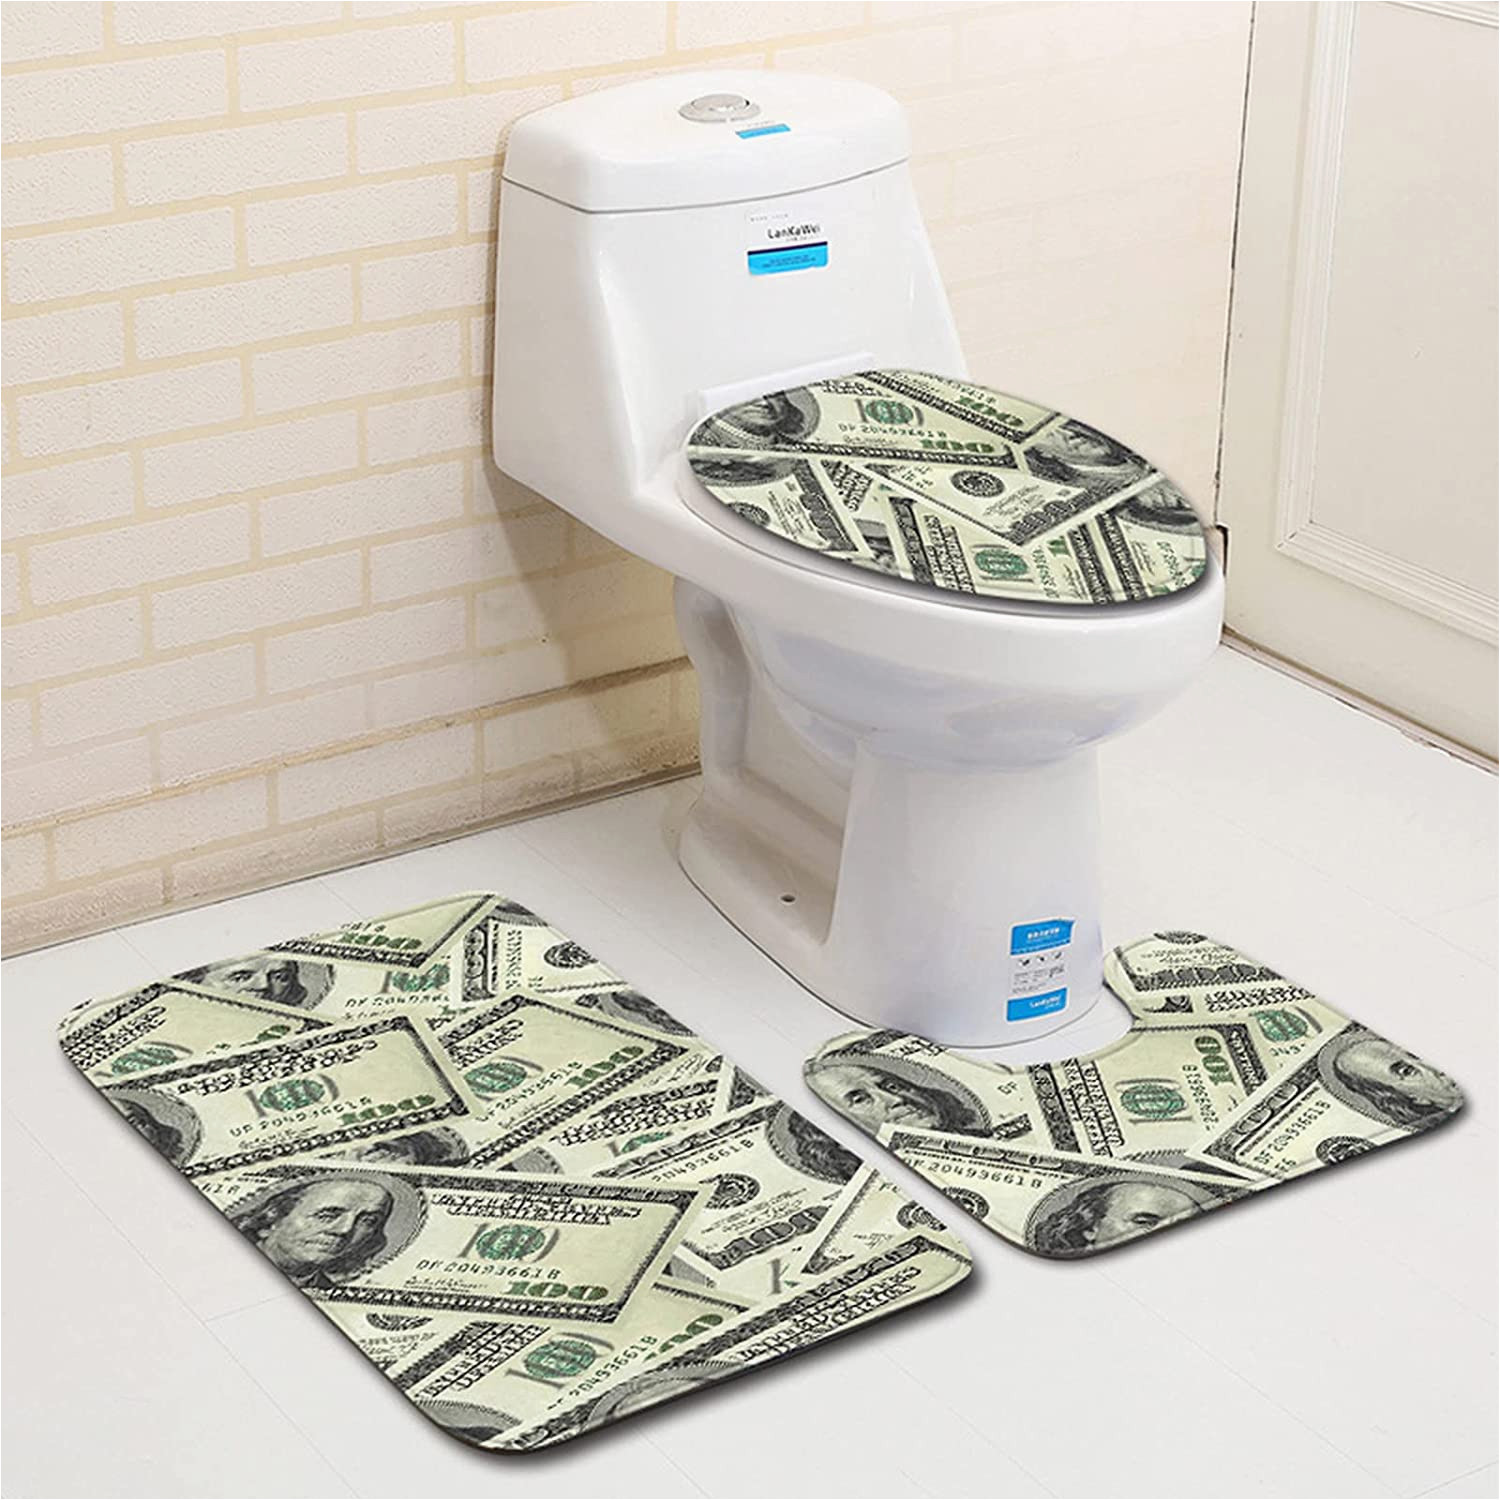 Bath Rugs and Lid Covers Yumech Set Of 3 Bathroom Rugs Non Slip toilet Contour Mat Lid Cover Bathroom Mat Bathroom Rugs Floor Mat Rug toilet Mat for Washroom Shower Room …